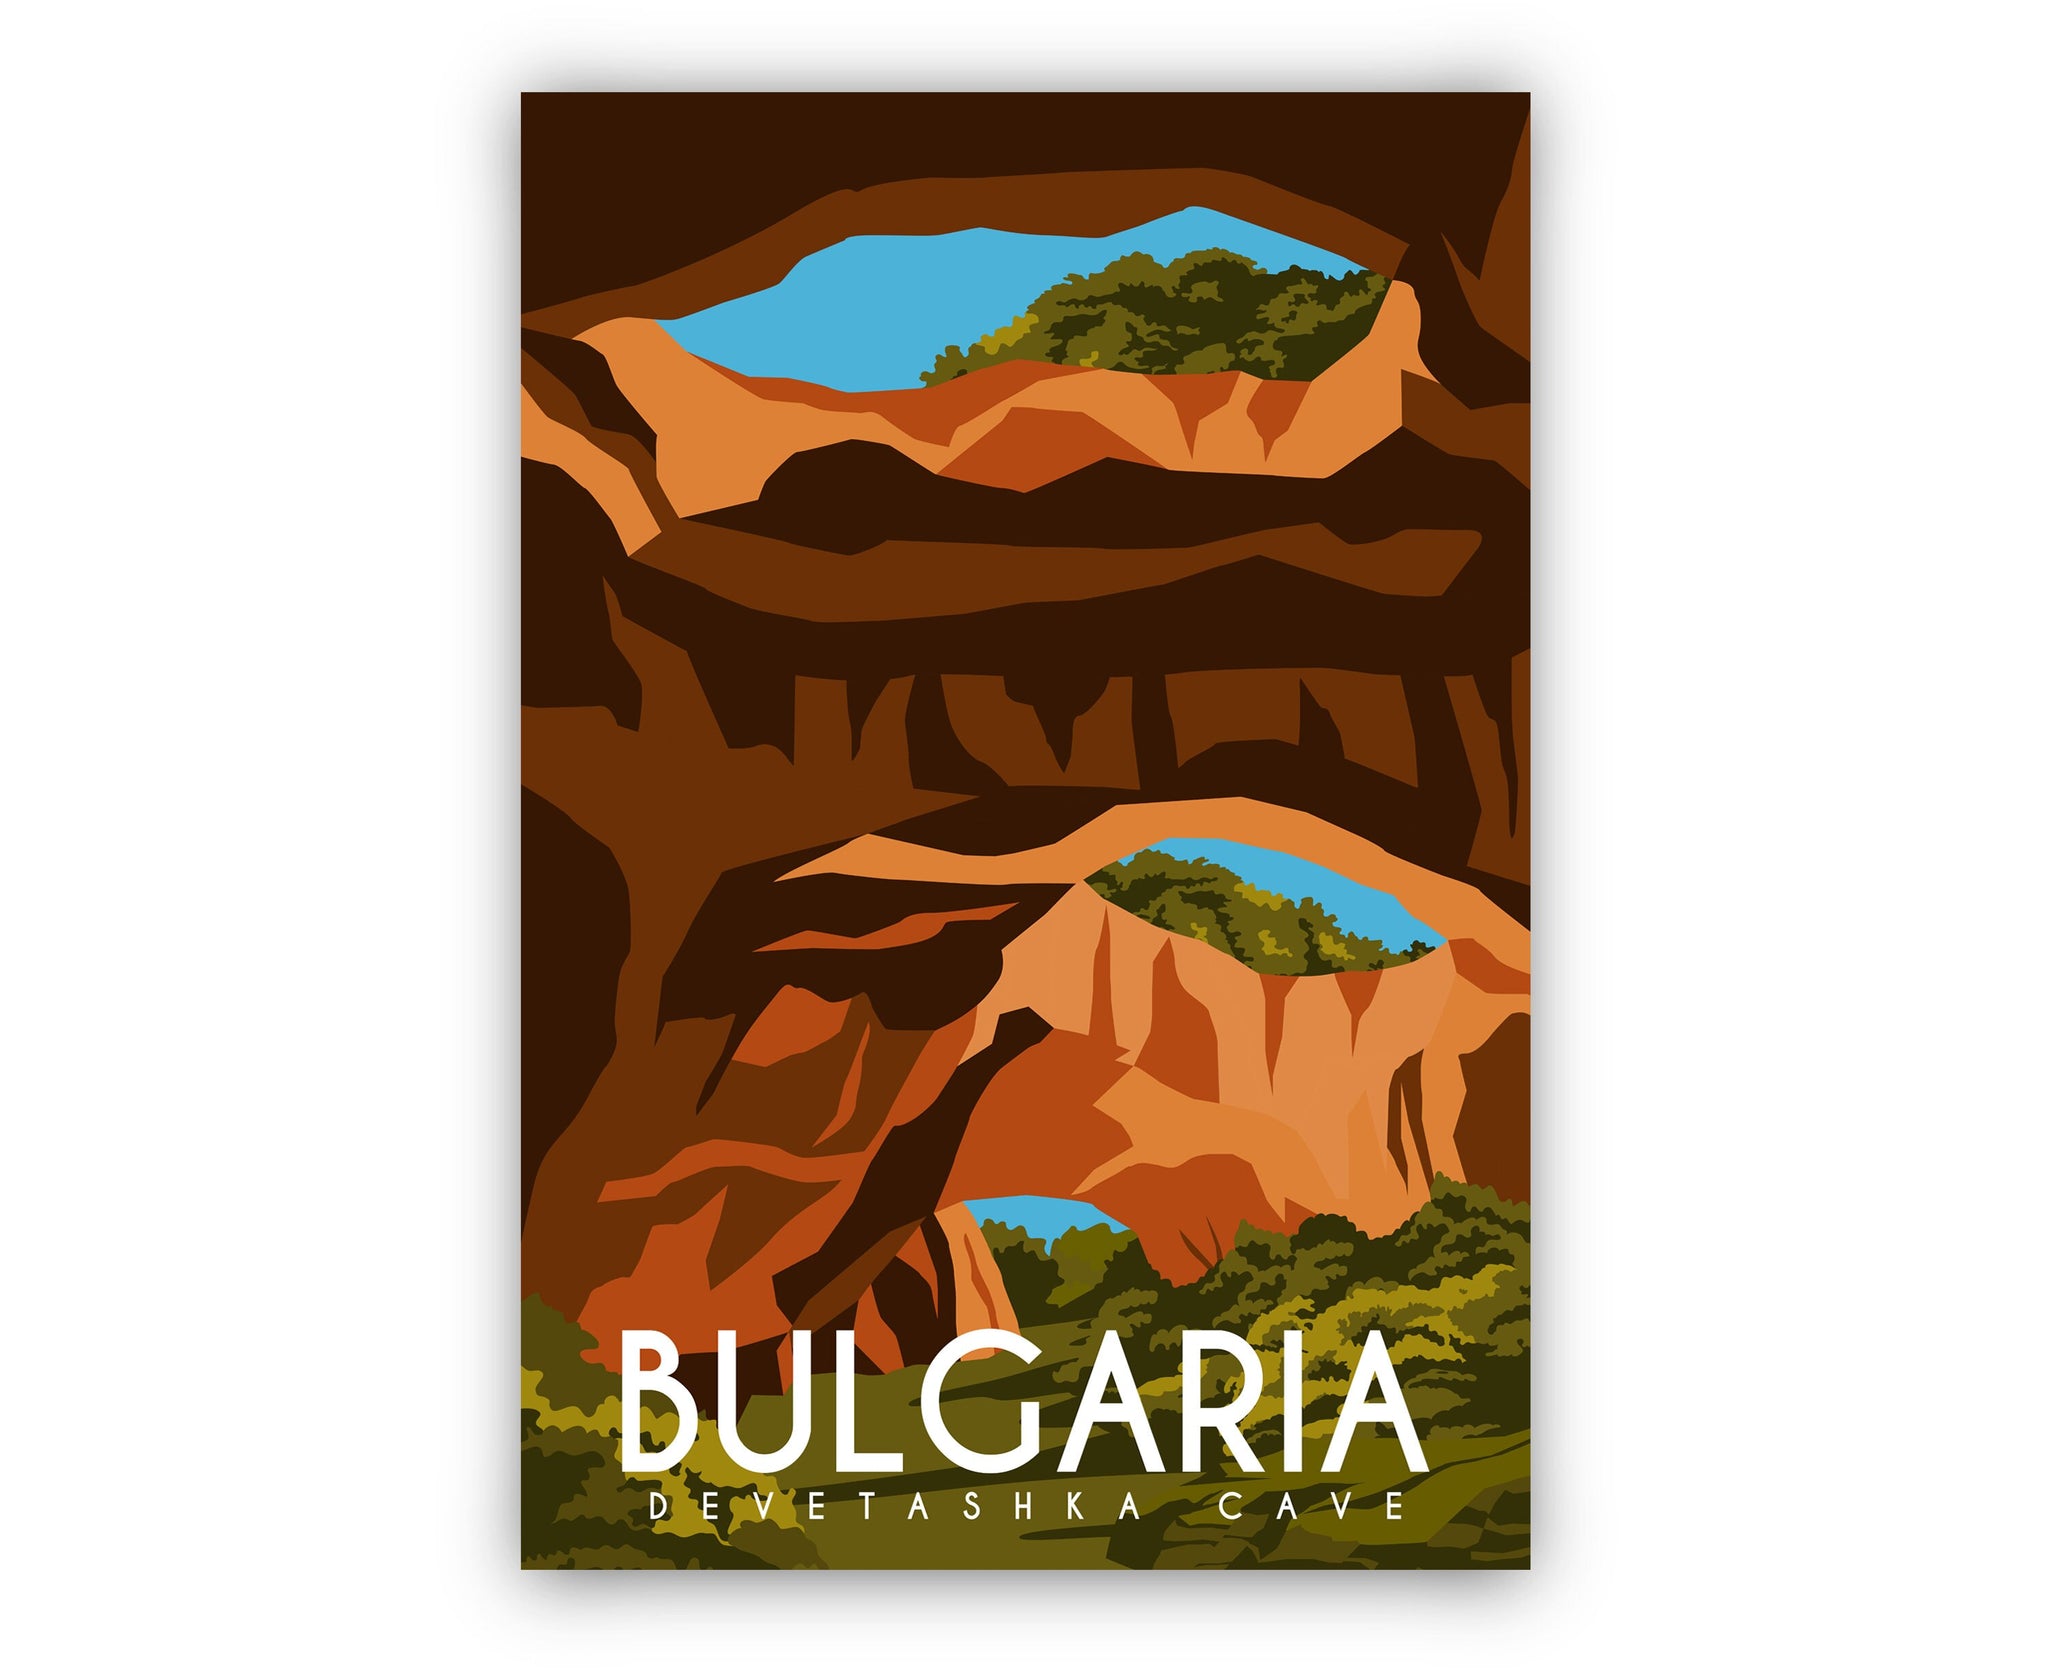 BULGARIA retro style travel poster, Rustic poster print, Home wall art, Office wall decorations, Bulgaria vintage map poster work art print